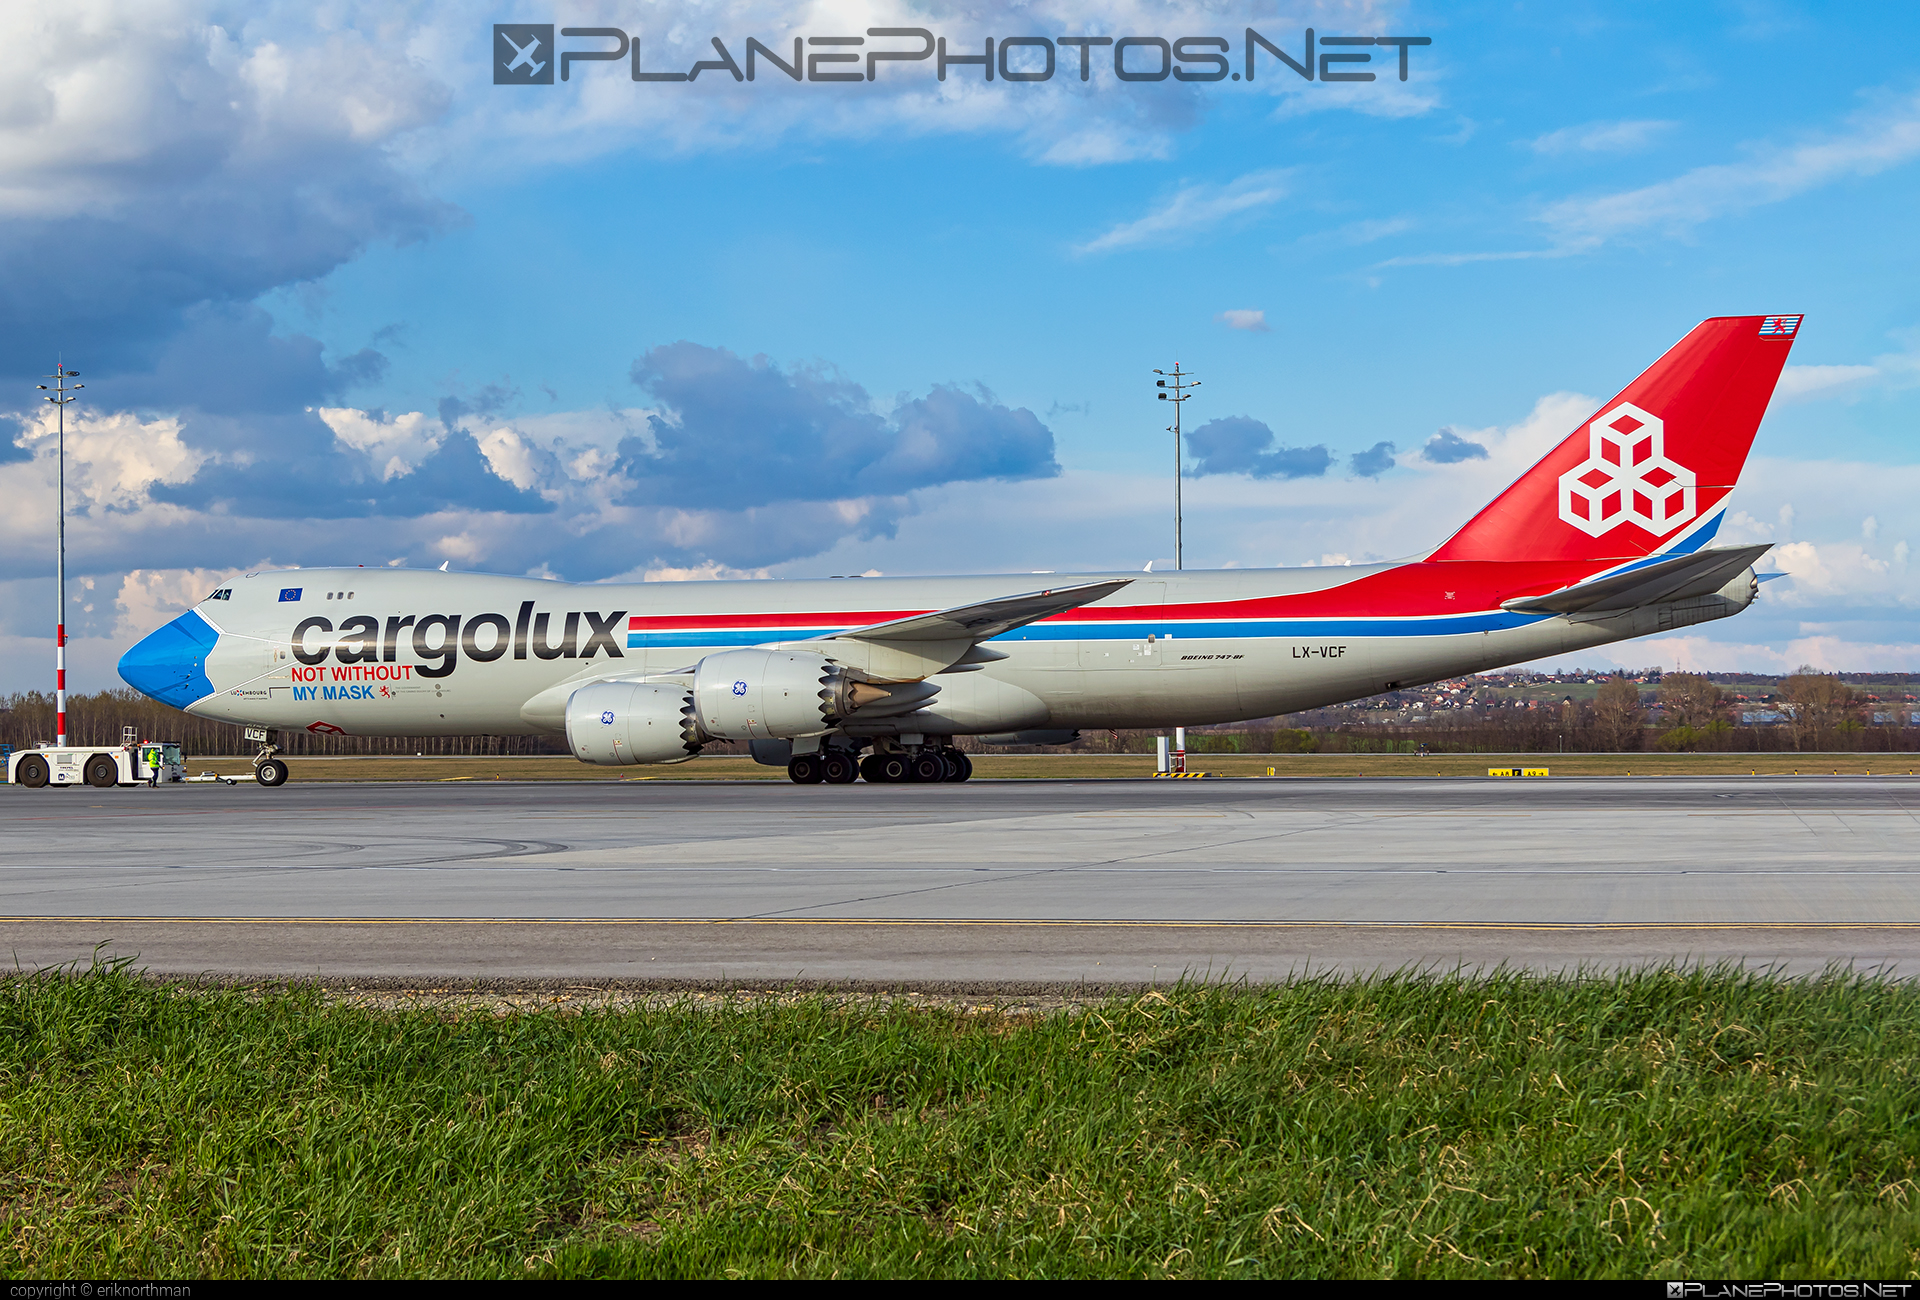 Boeing 747-8F - LX-VCF operated by Cargolux Airlines International #b747 #b747f #b747freighter #boeing #boeing747 #cargolux #jumbo